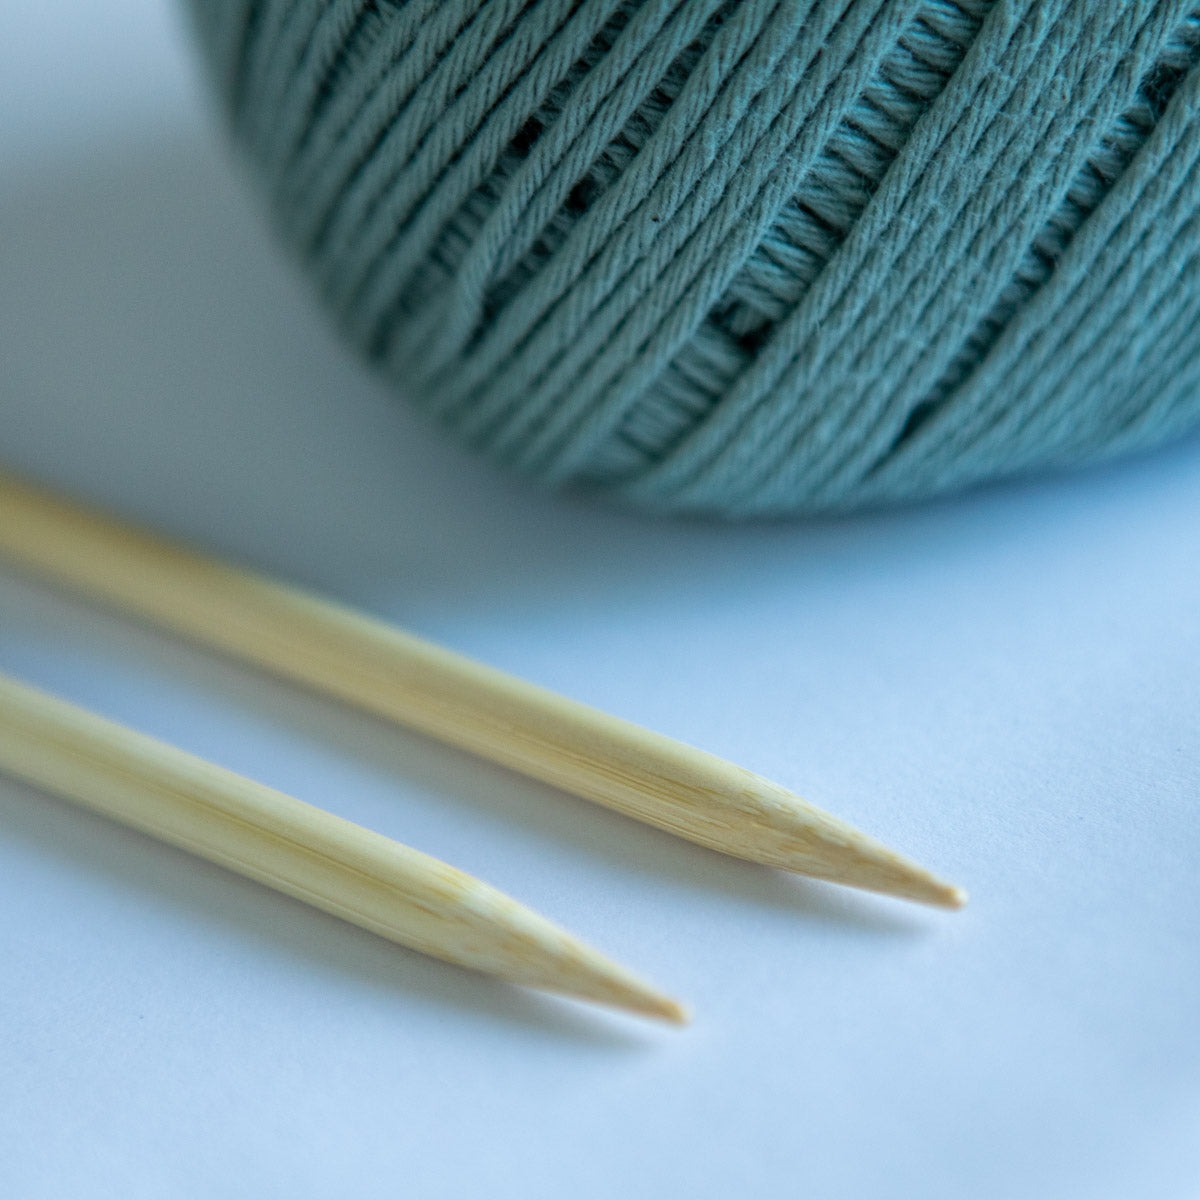 Knitter's Pride Bamboo Double Pointed Needles